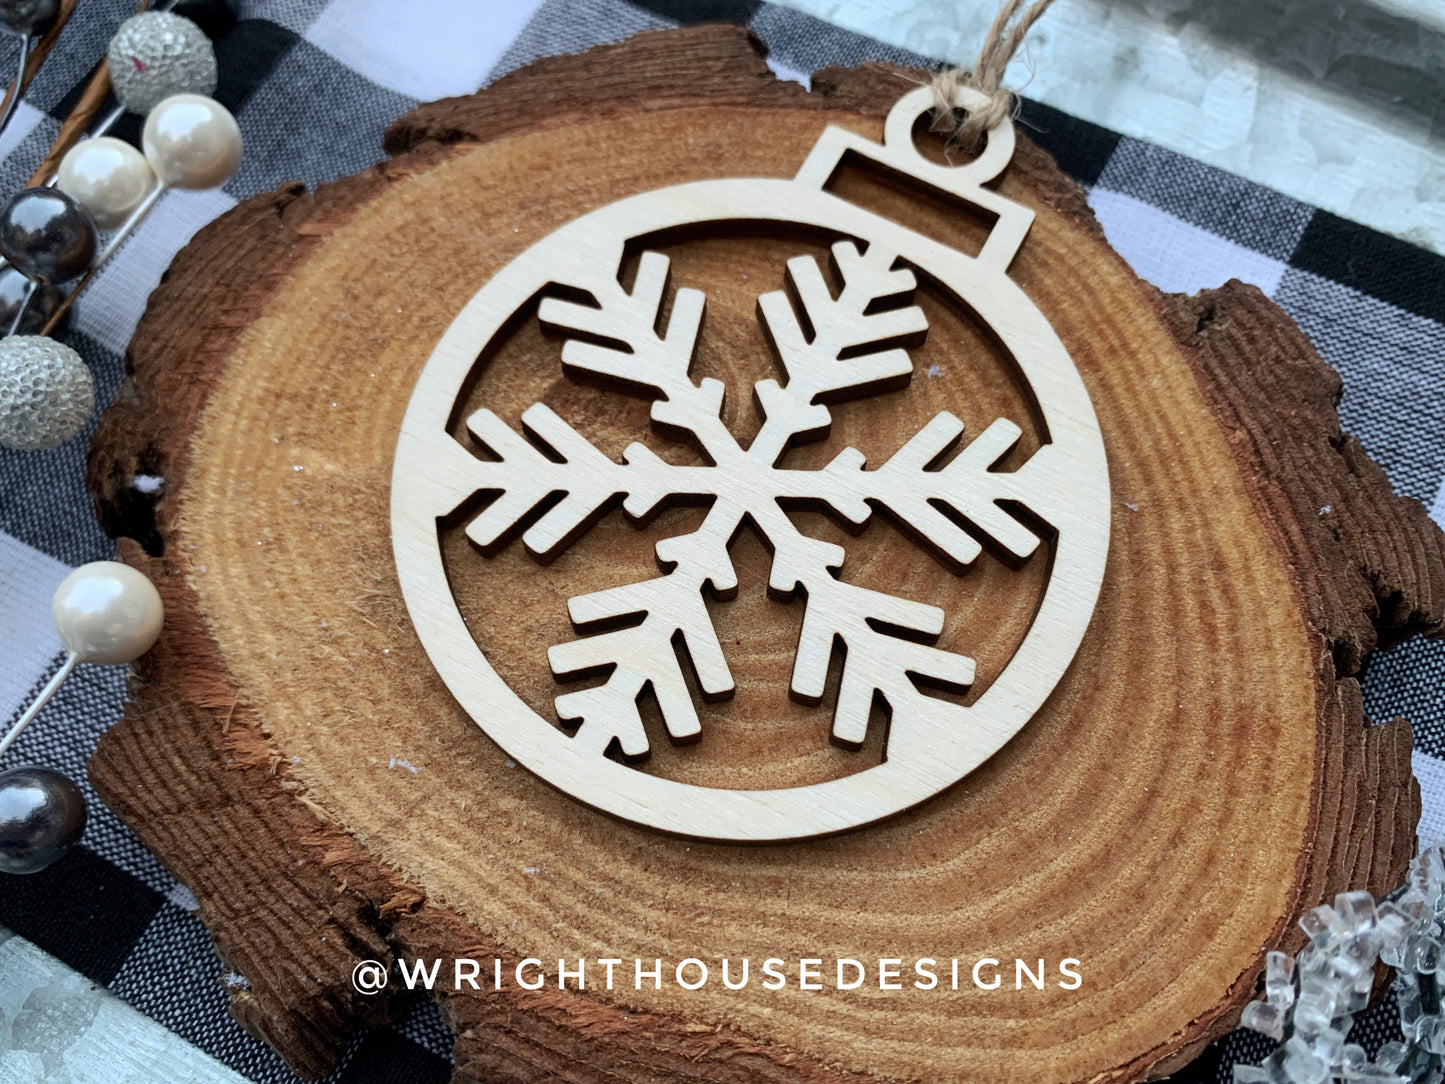 Wooden Snowflake - Christmas Tree Ornaments - Winter Decorations